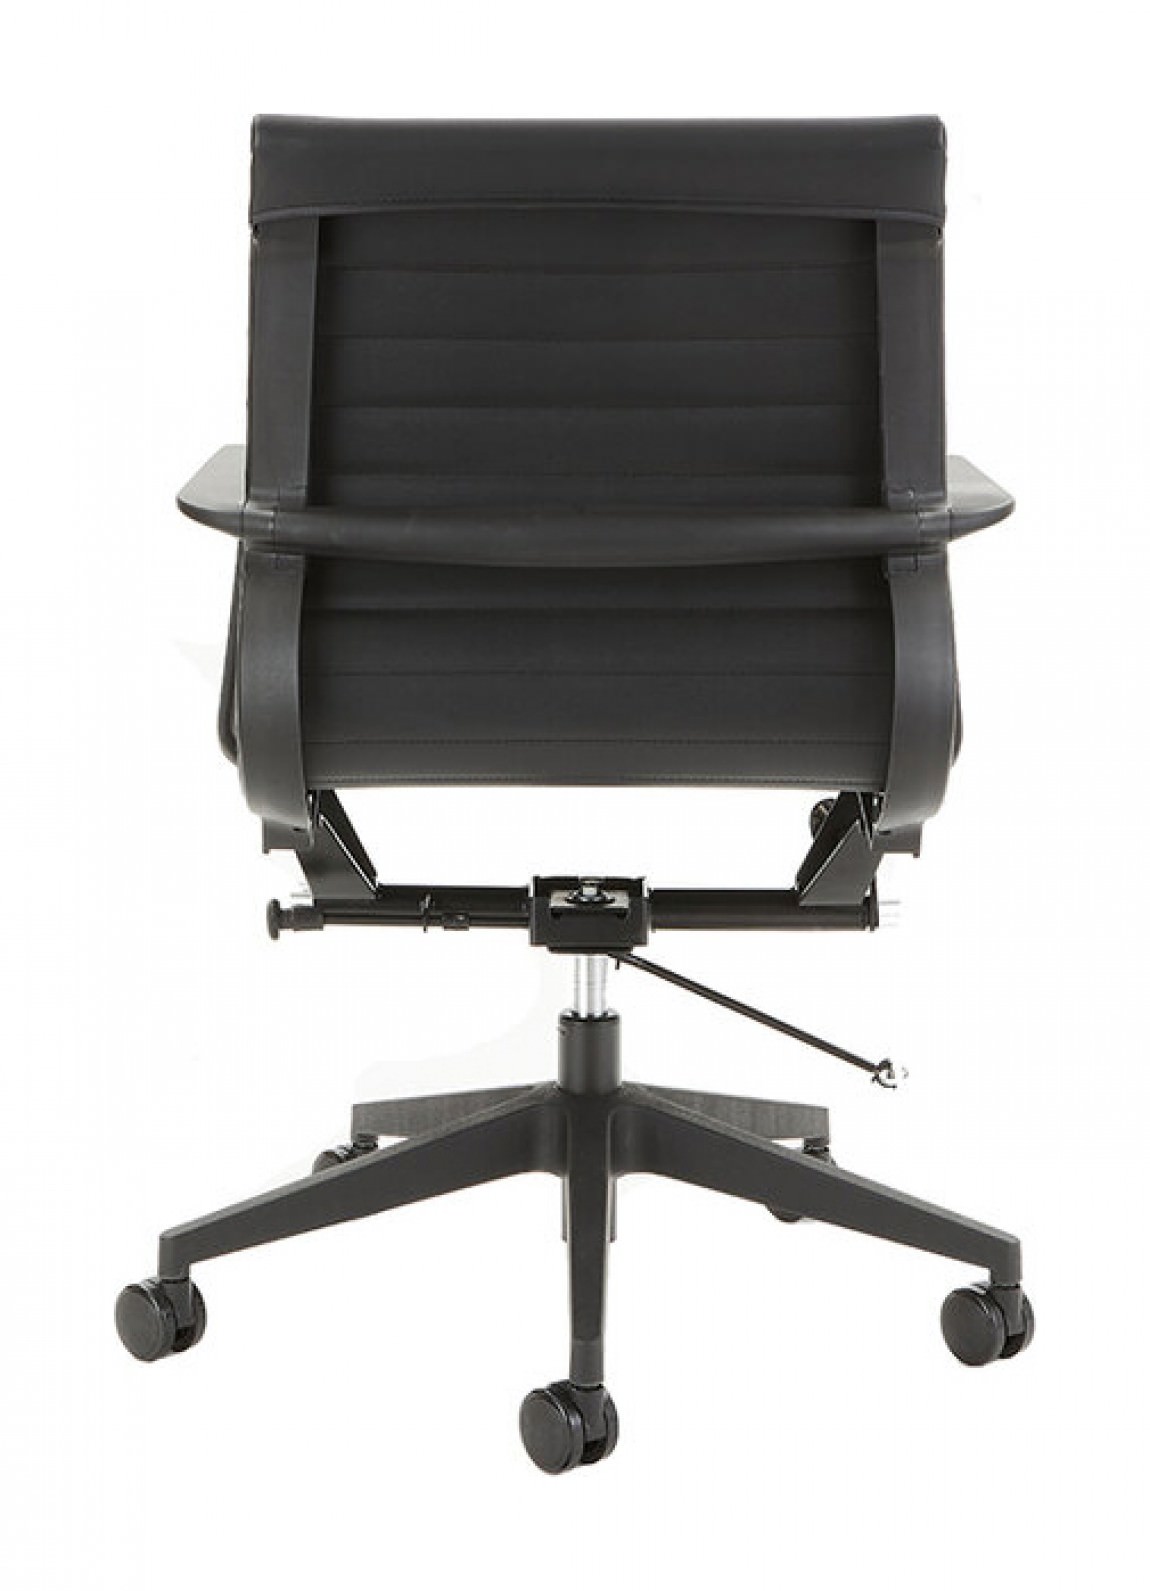 Low Back Conference Room Chair with Arms